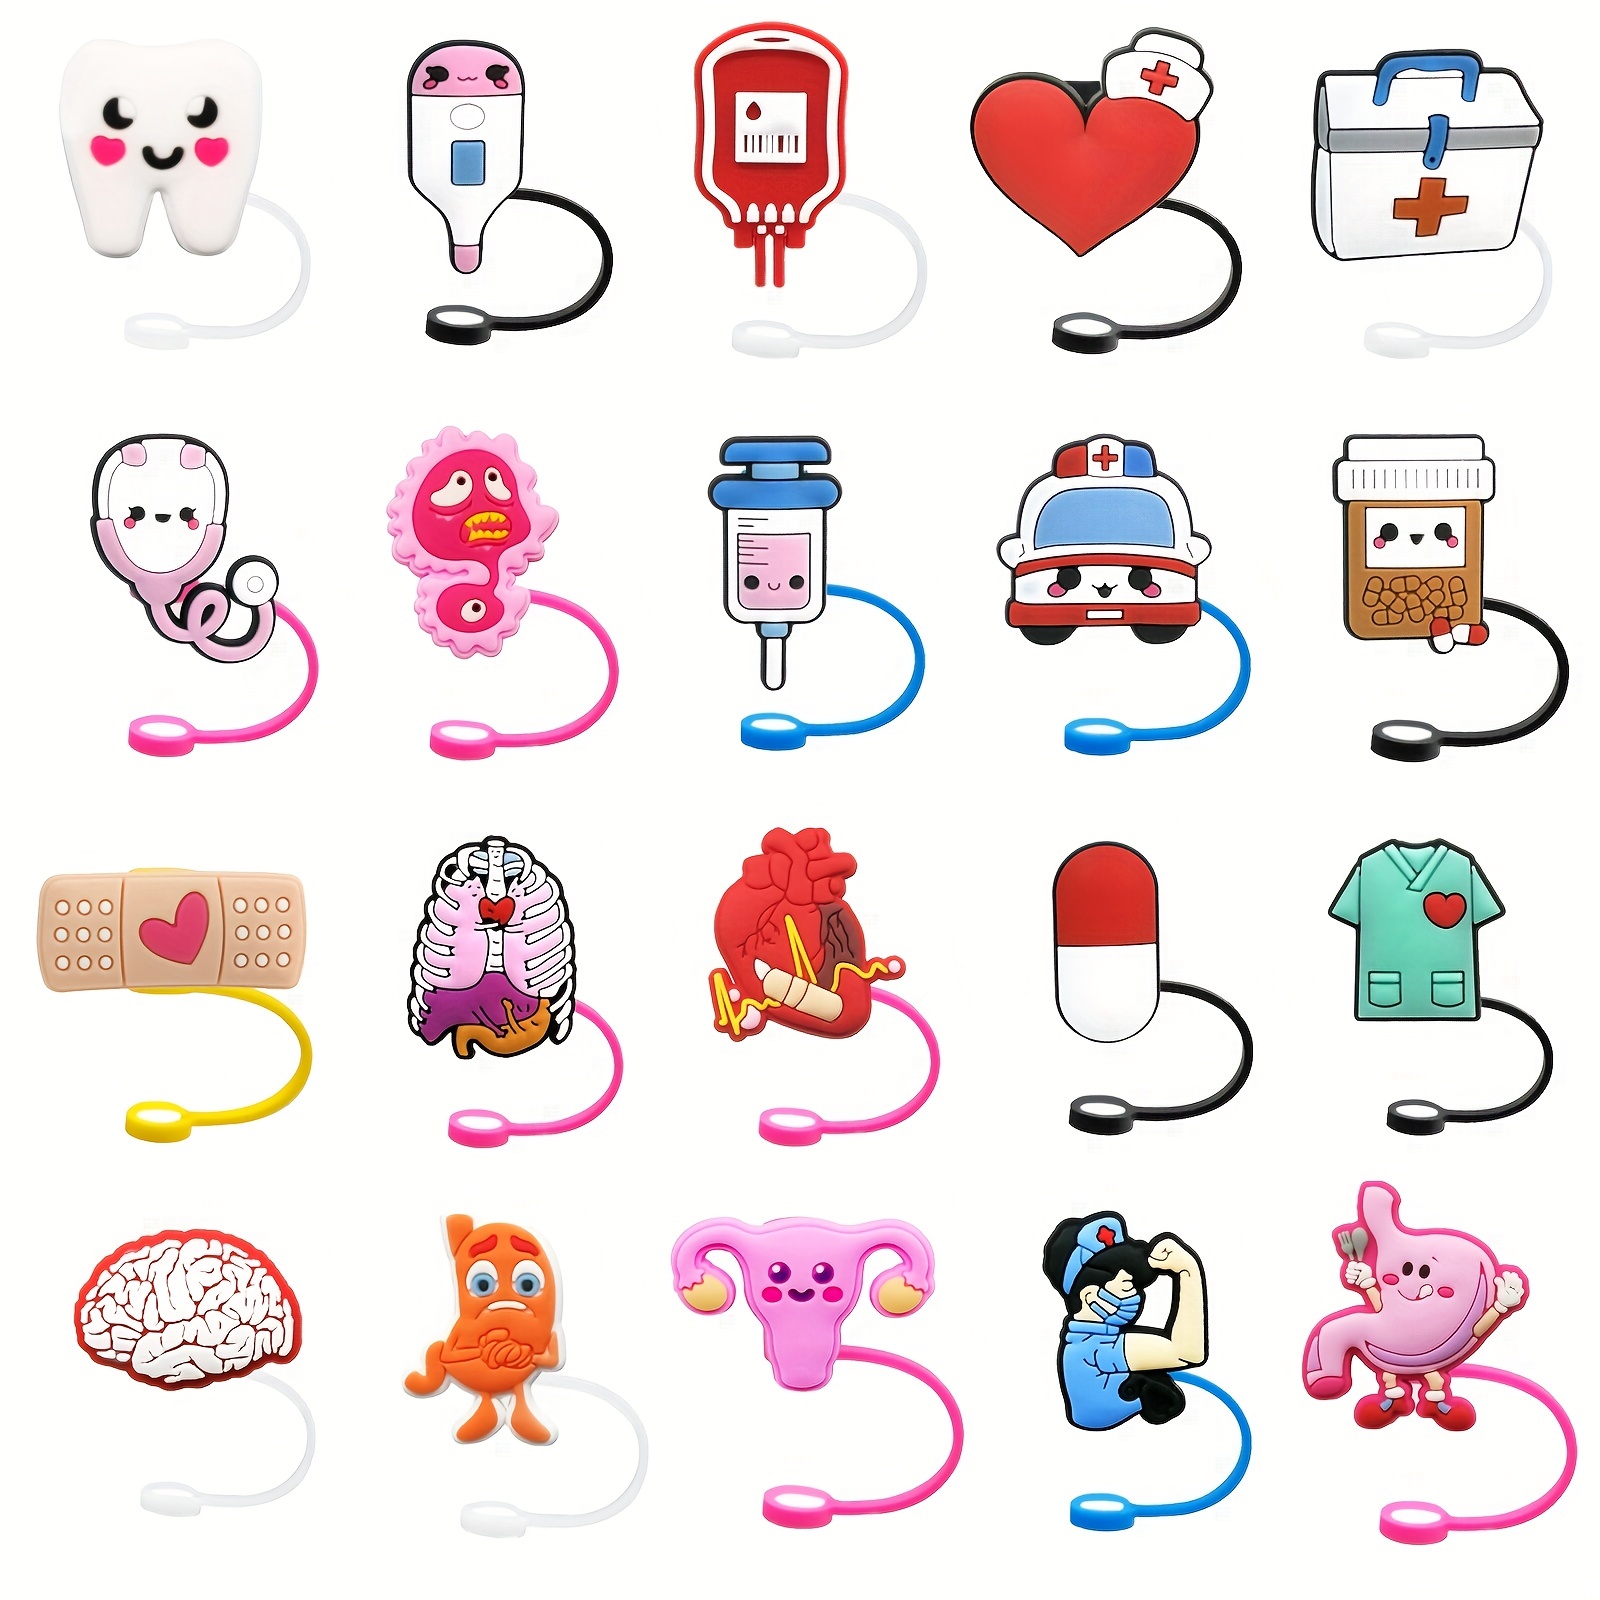  Silicone Nurse Straw Cover - 11 Pack Cute Reusable